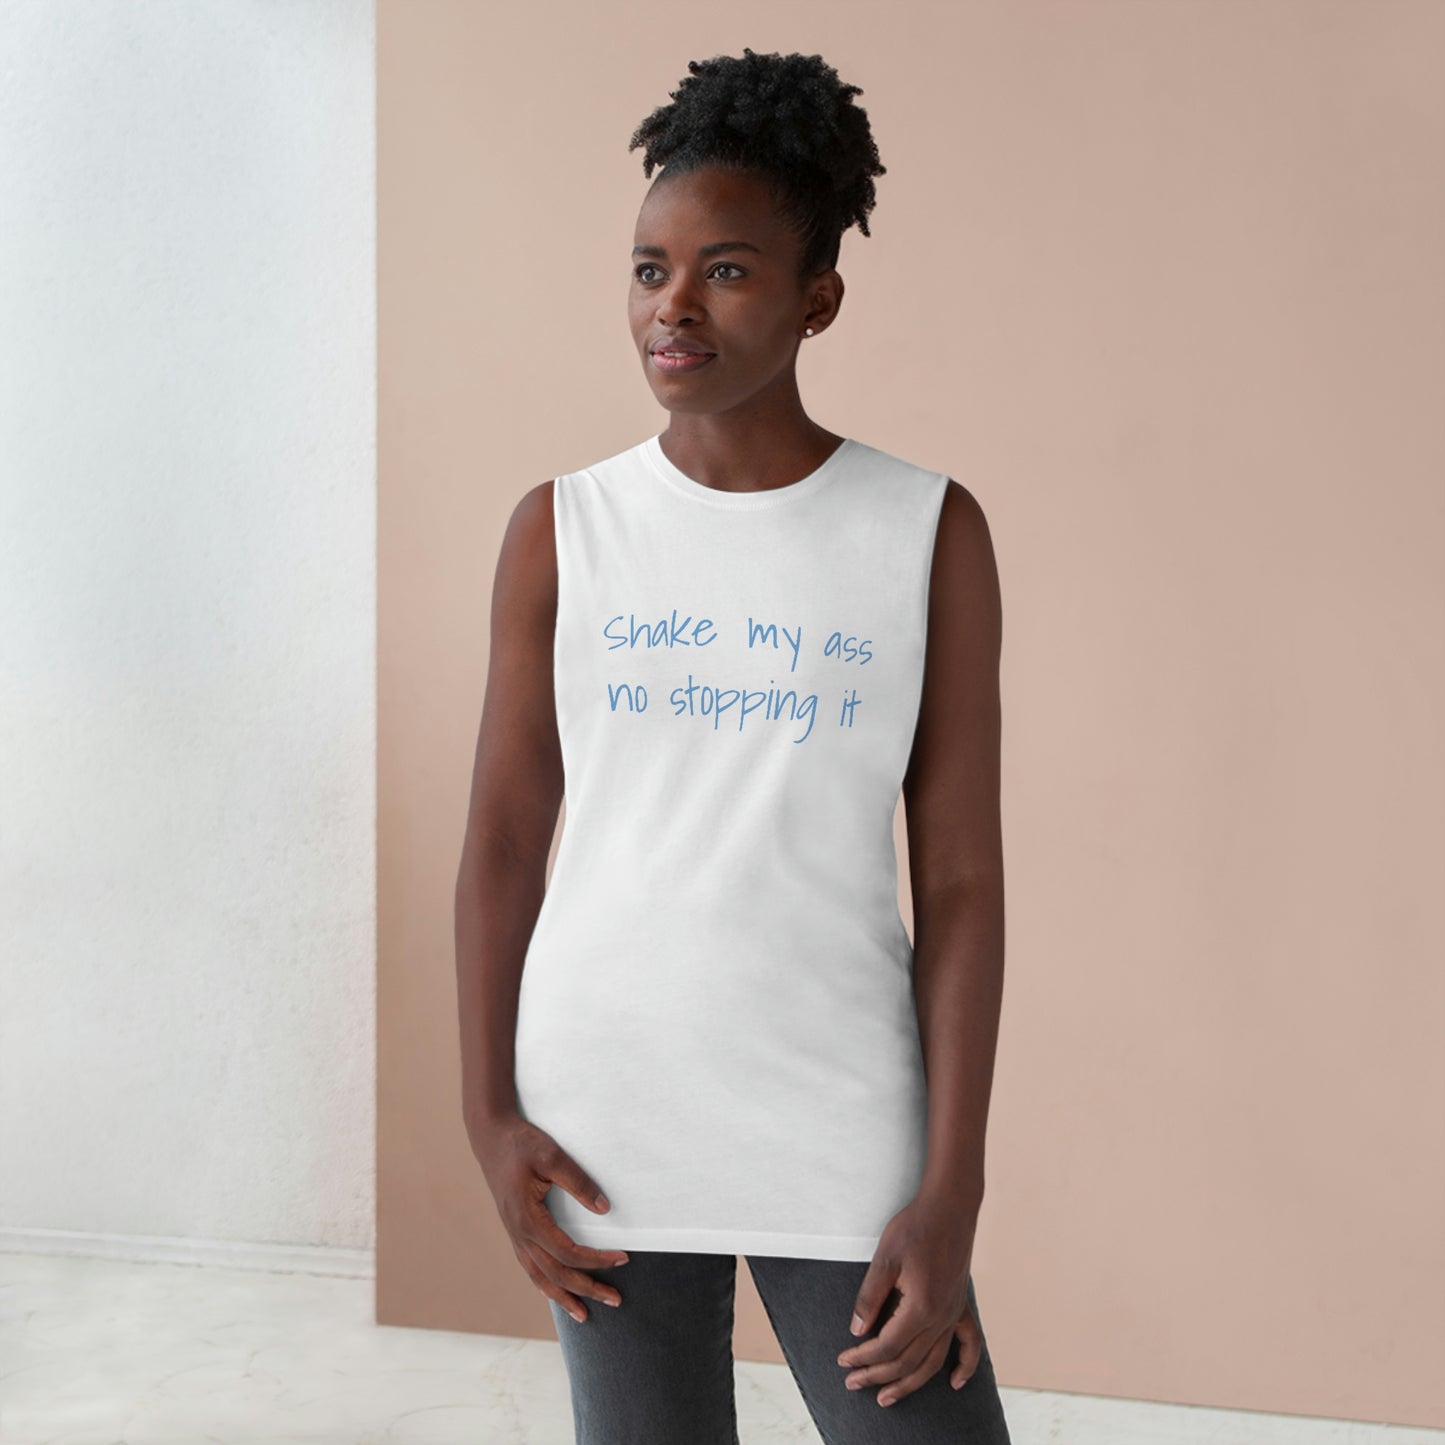 'Shake my ass, no stopping it' - Lyric collection Unisex Tank